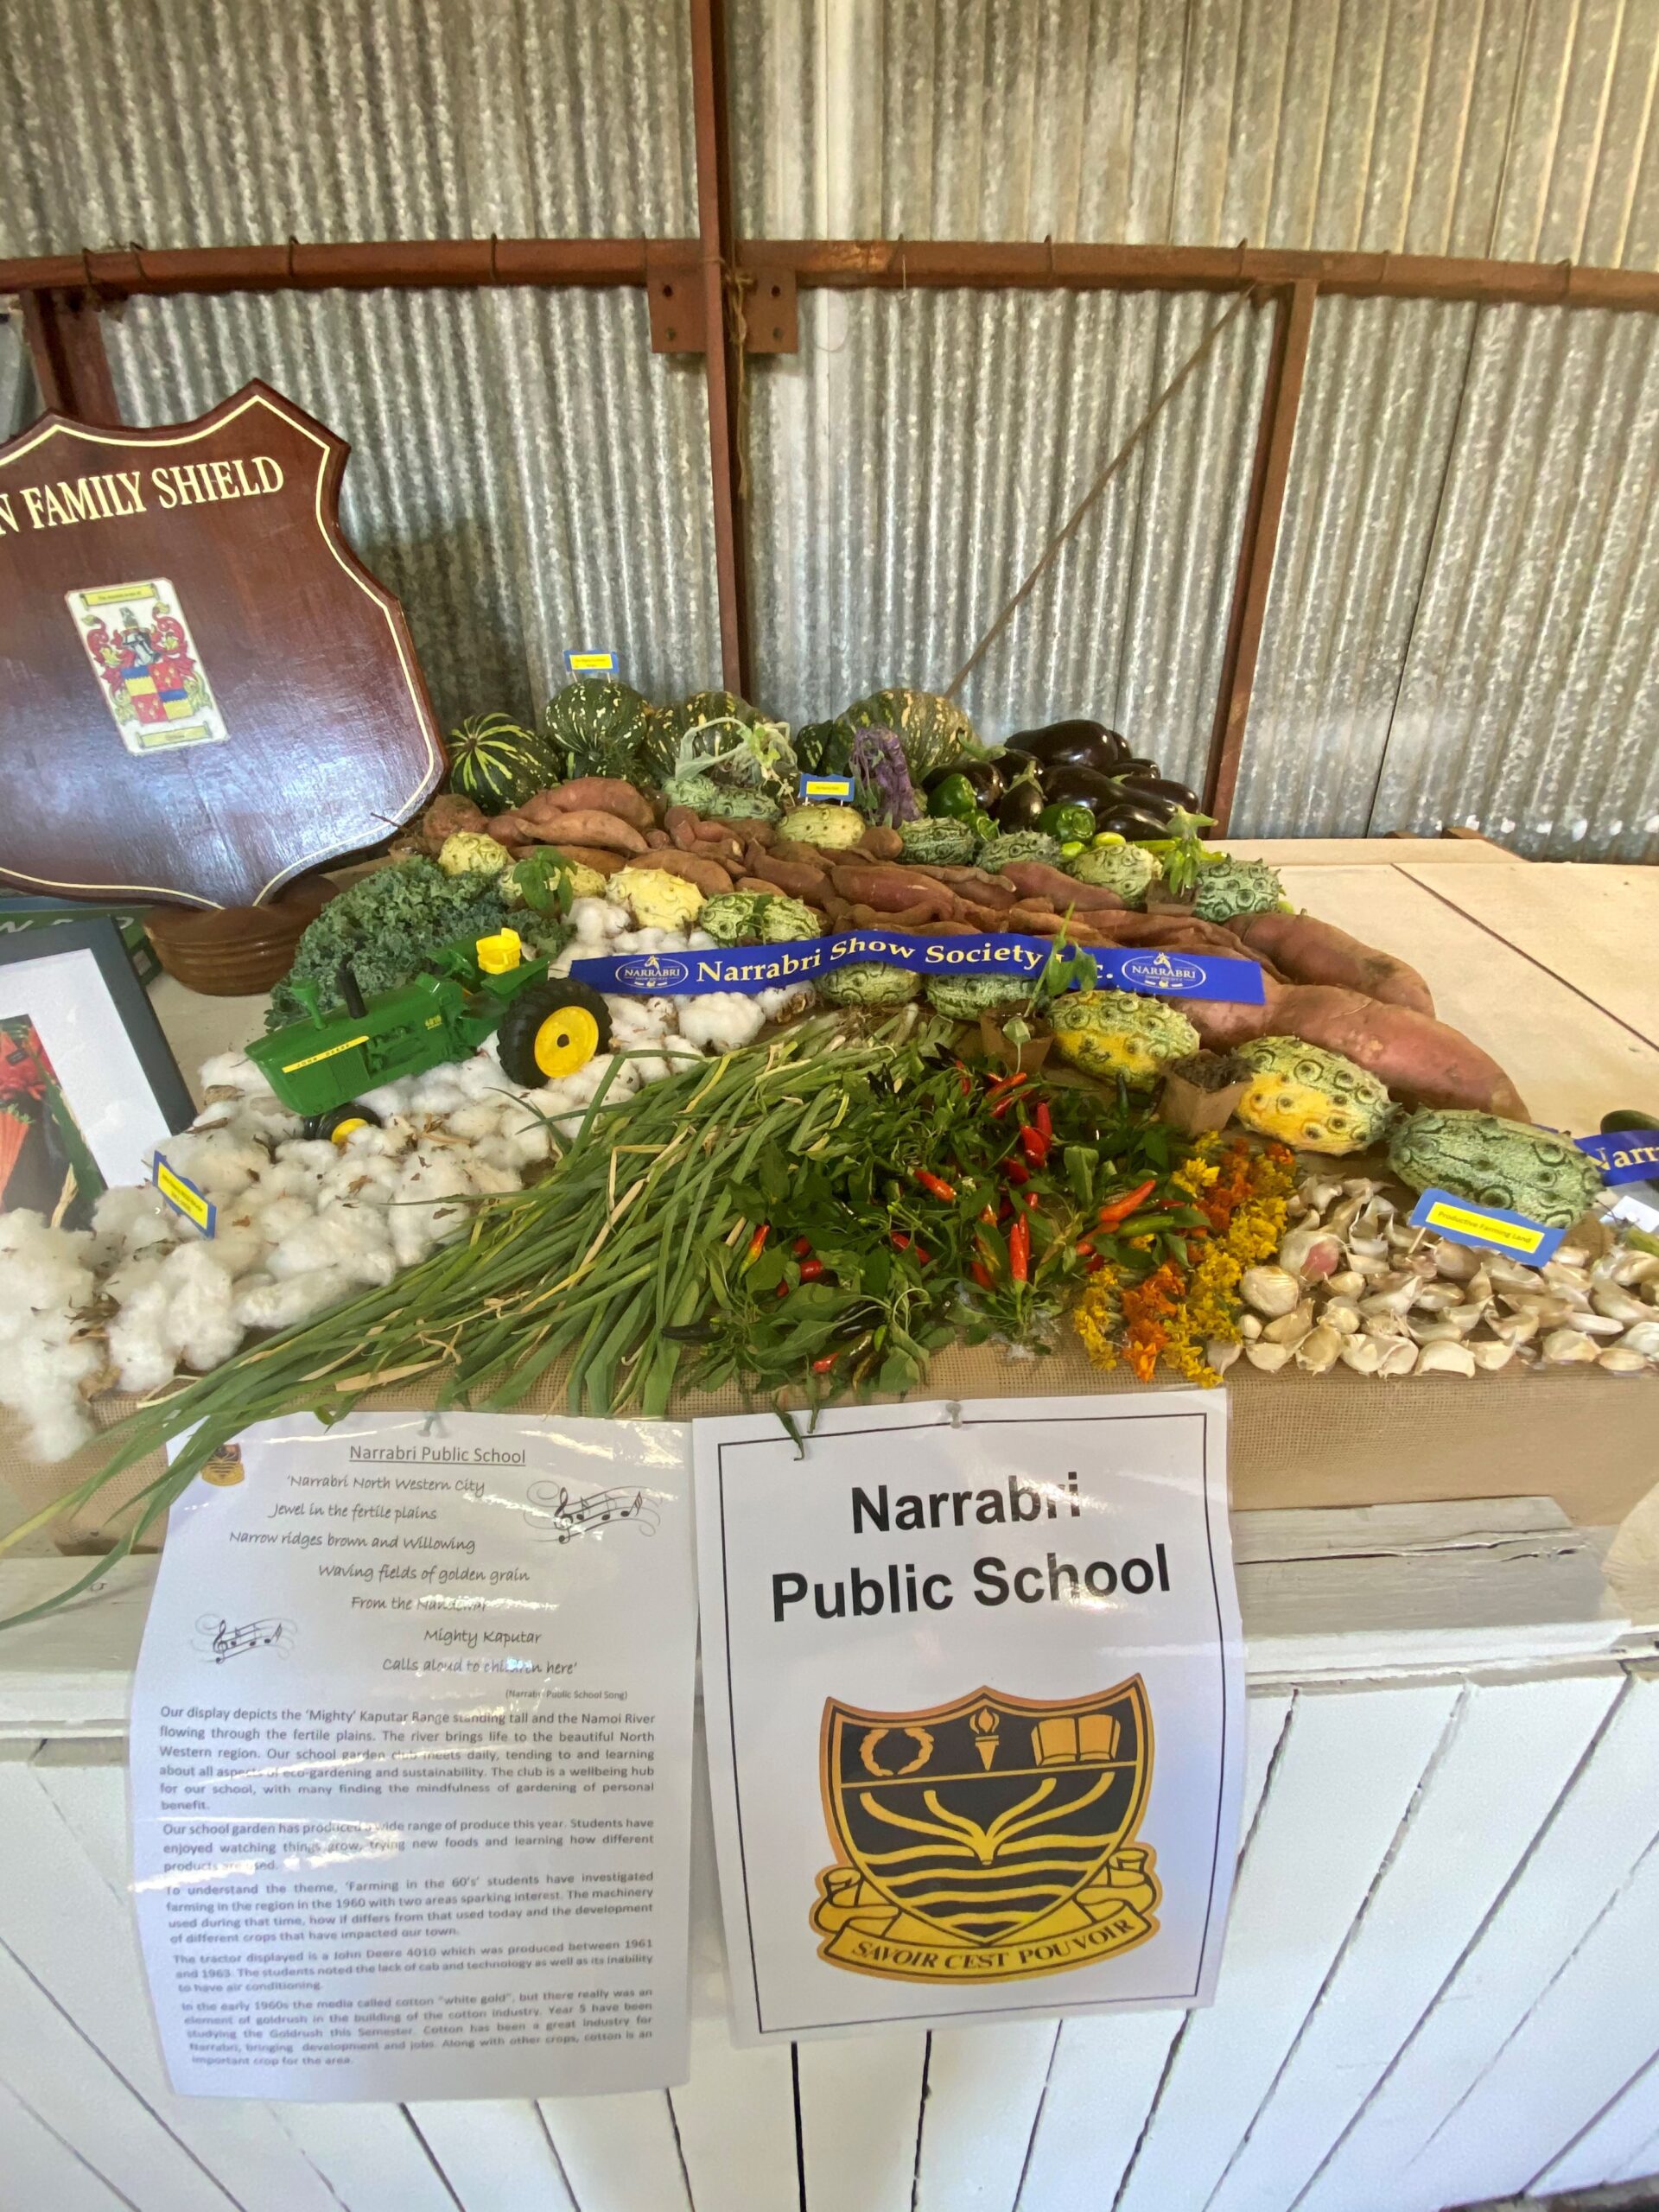 Narrabri Public School won the Orman Family School Challenge and best exhibit of the show. The theme for 2021 was ‘Farming in the 60s’ and because the school won, it gets to choose next year’s theme.